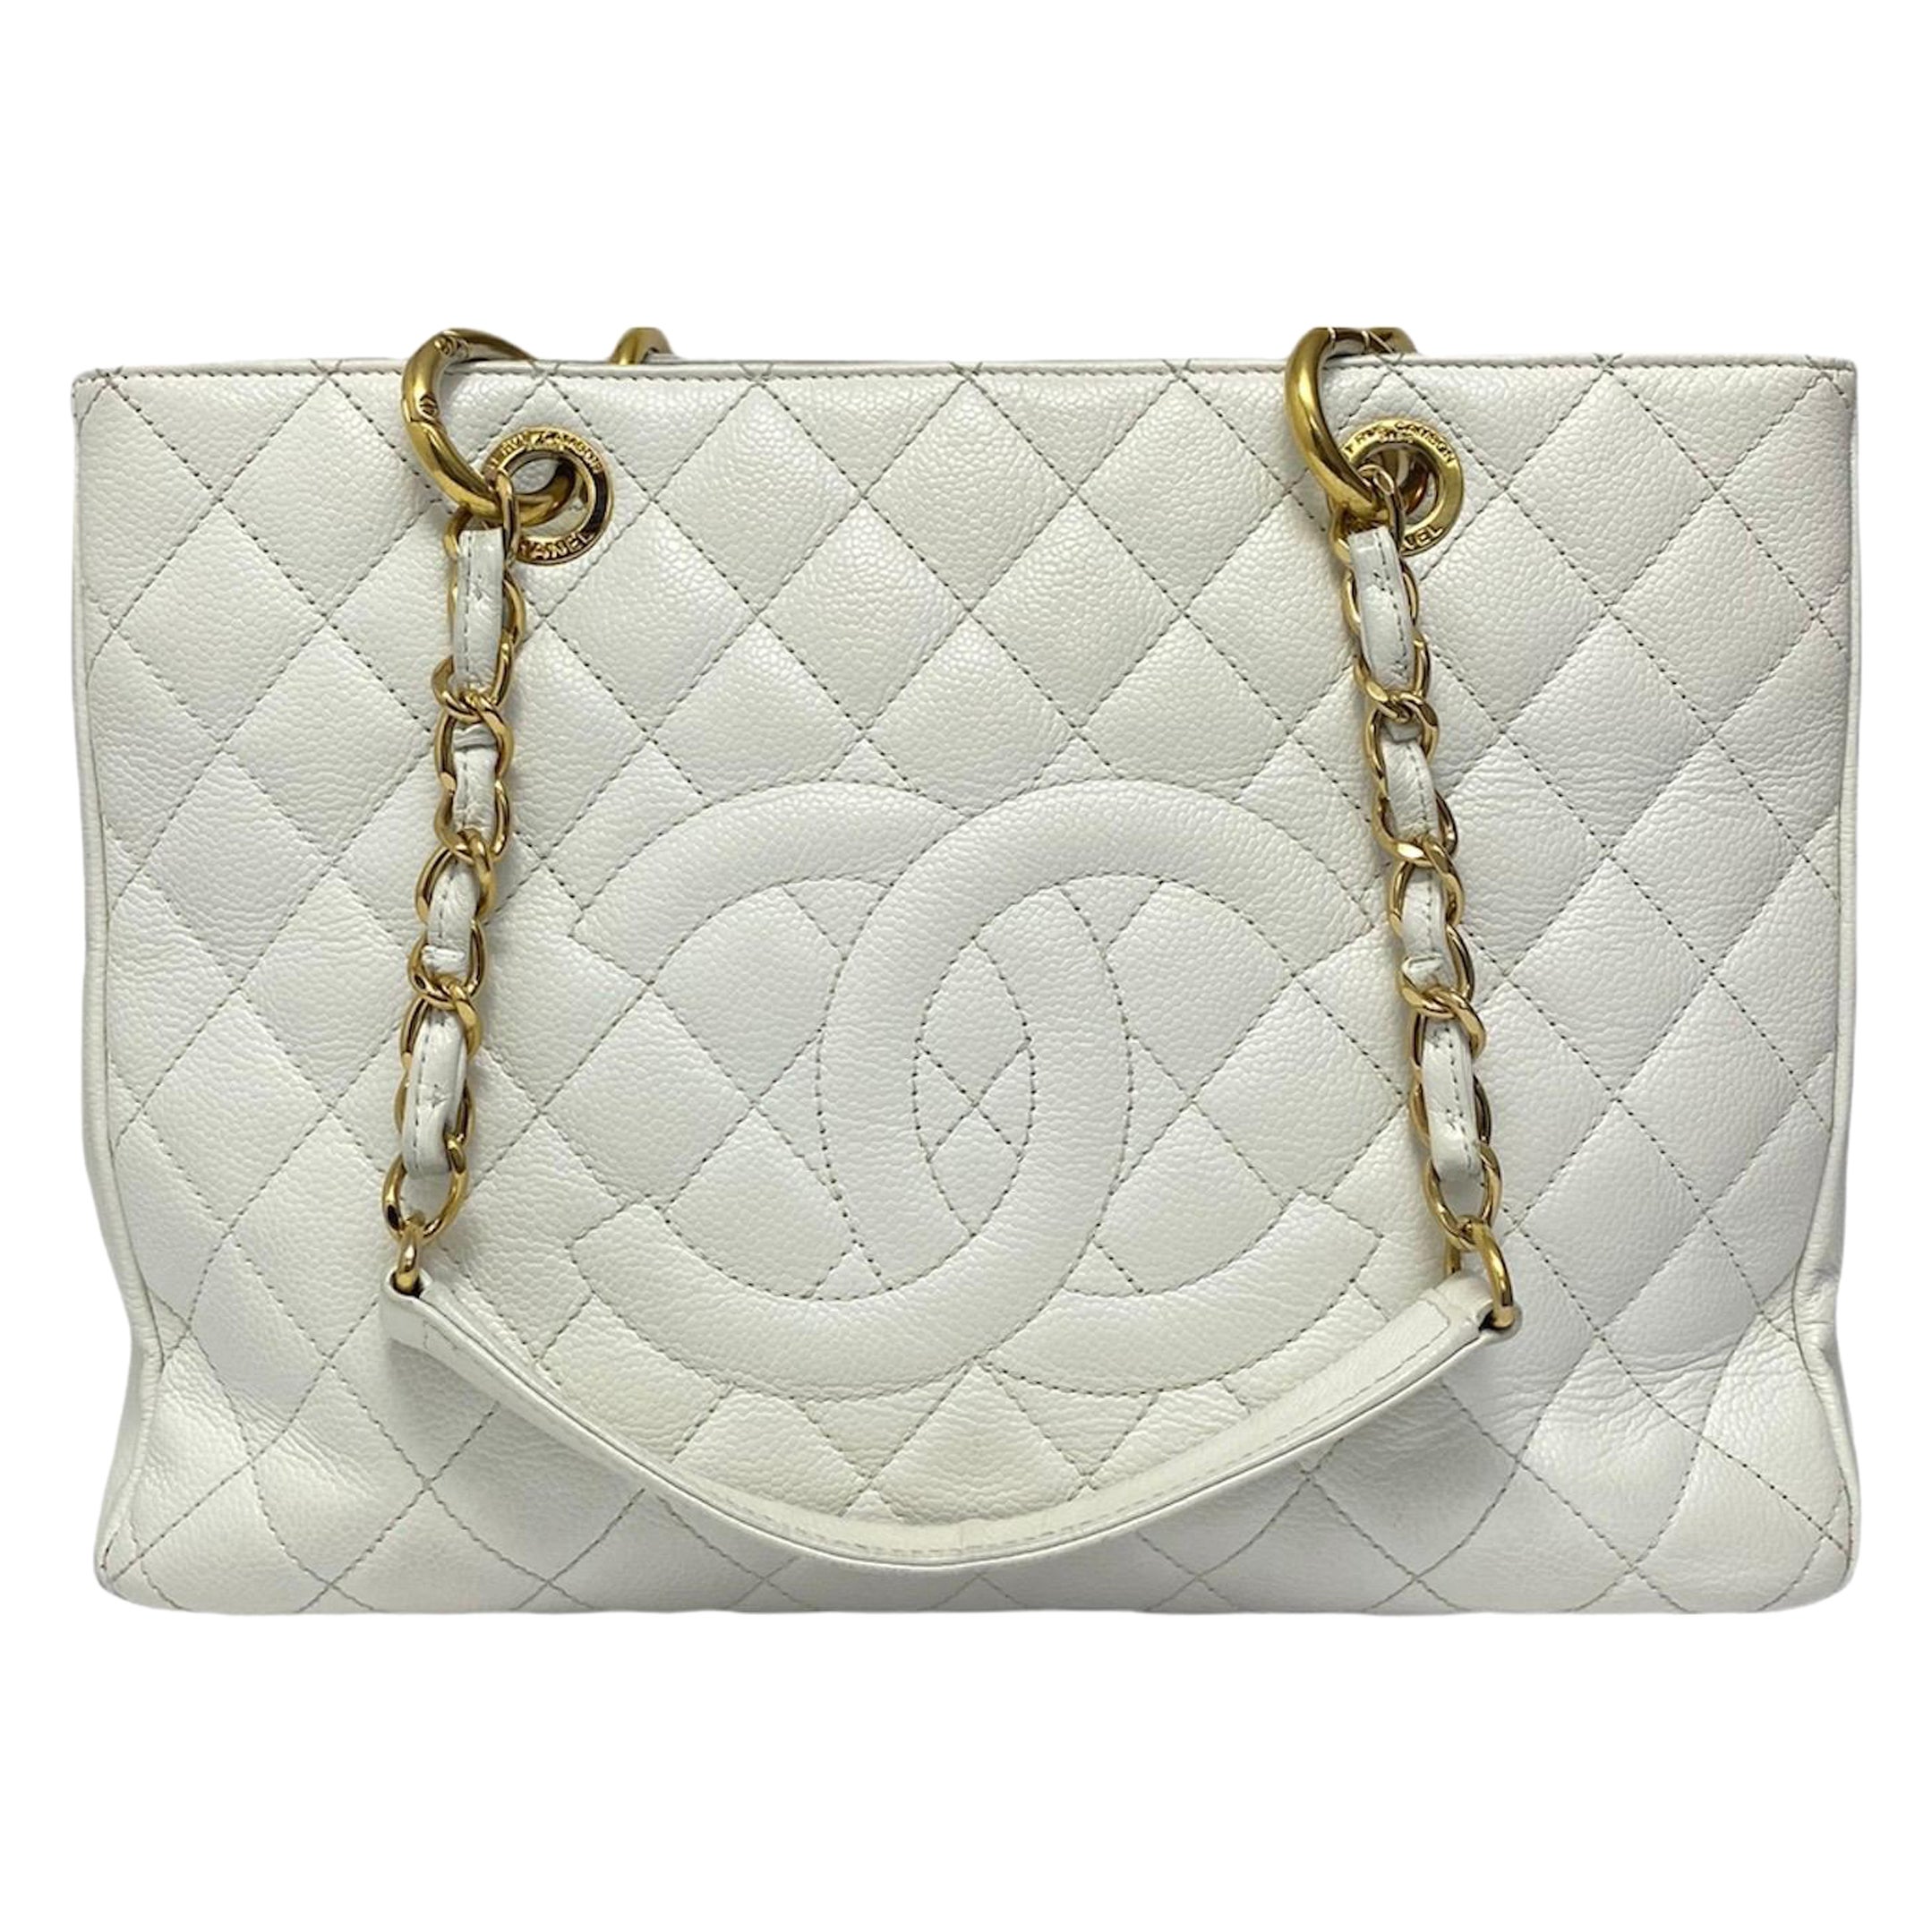 2011 Chanel White Leather GST Bag